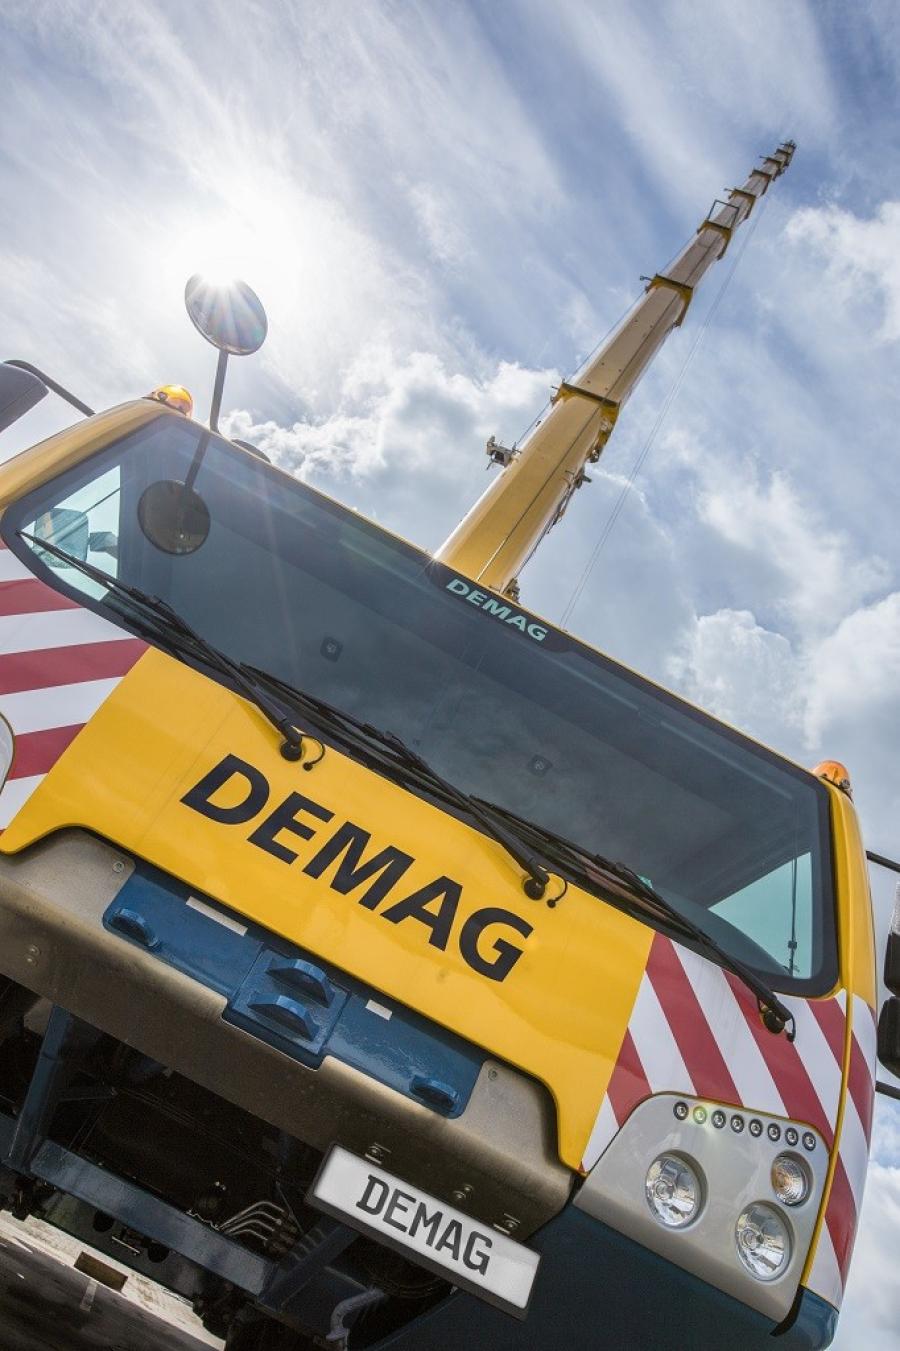 Included in Renegar-Driggers  Machinery’s order is the 4-axle, 120-ton (100-t) capacity class, Demag AC 100-4L all terrain crane, a pair of 5-axle, 180-ton (160-t) capacity class, Demag AC 160-5 all terrain cranes, and the three 5-axle, 245-ton (220-t) capacity class, Demag AC 220-5 all terrain cranes.